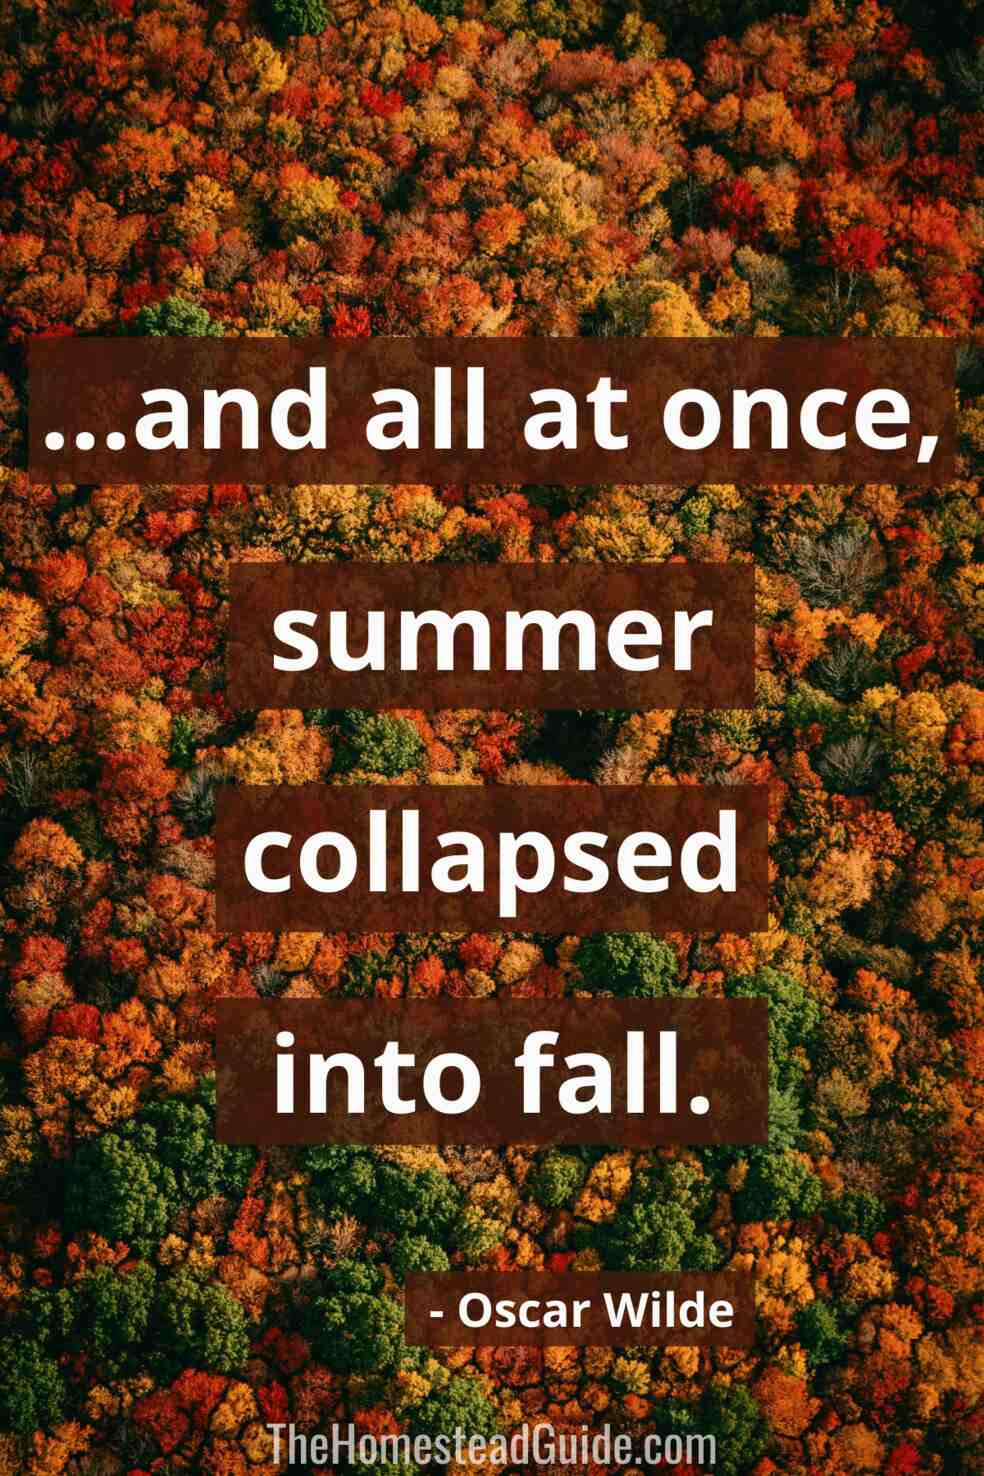 And all at once, summer collapsed into fall.